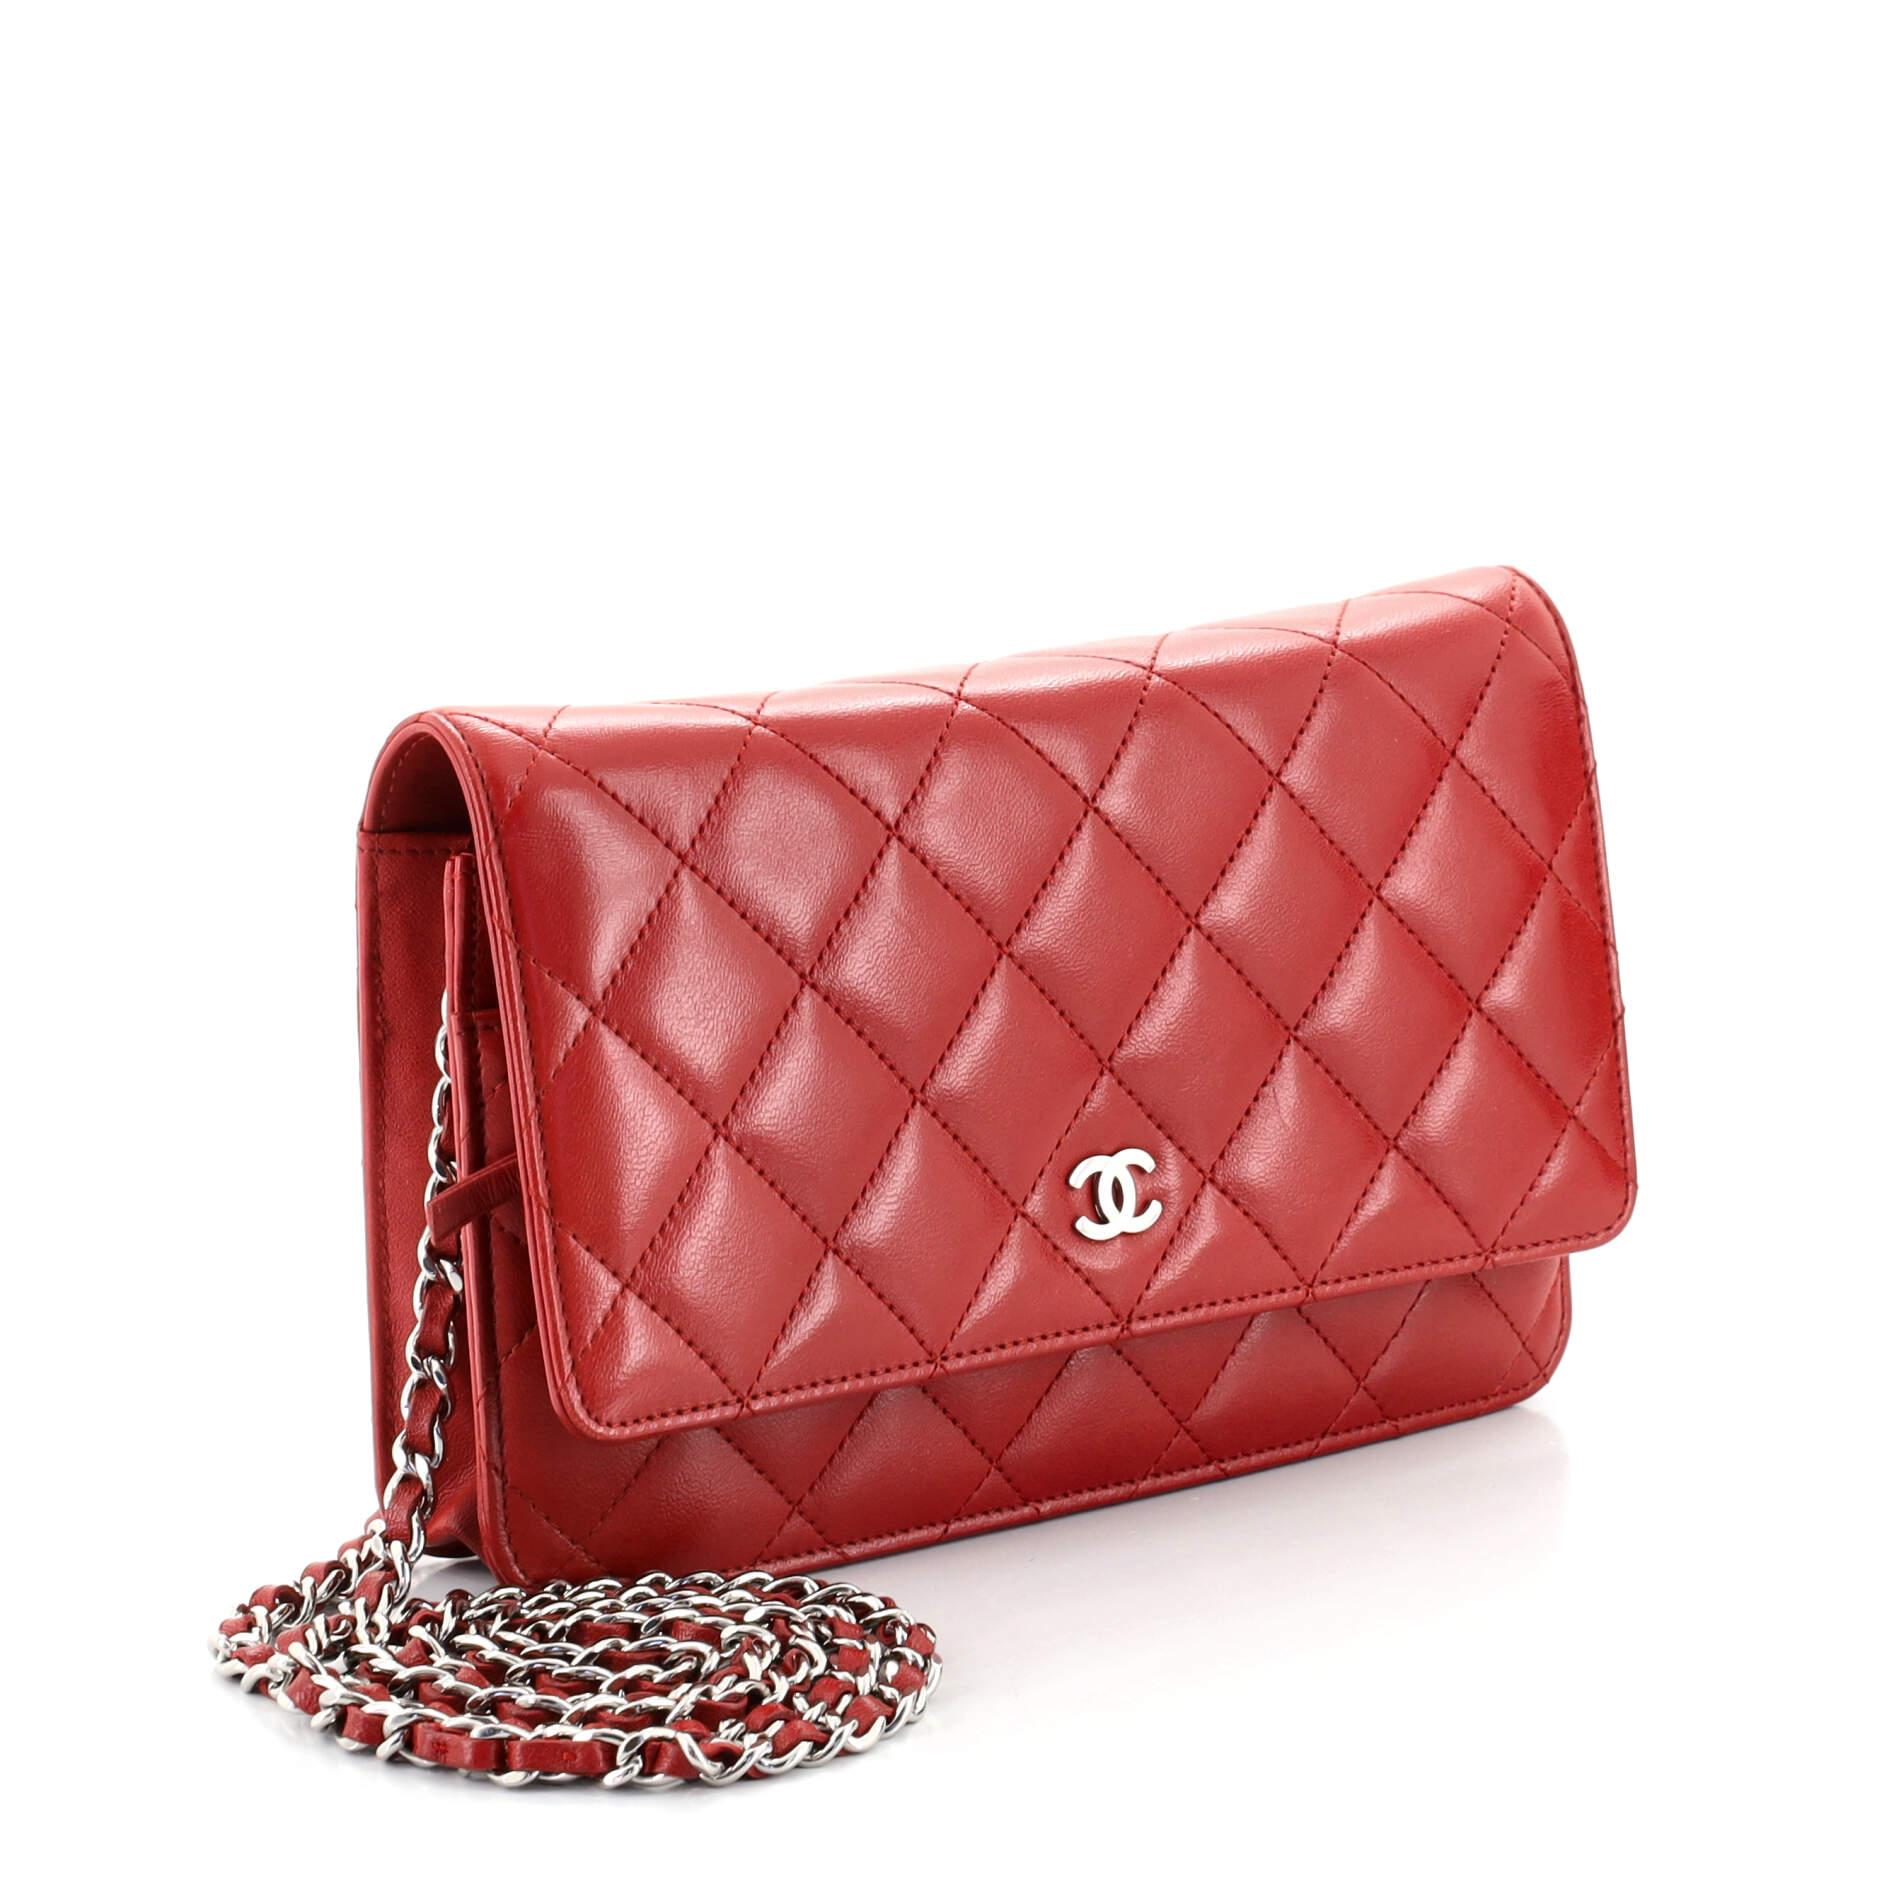 Red Chanel Wallet on Chain Quilted Lambskin